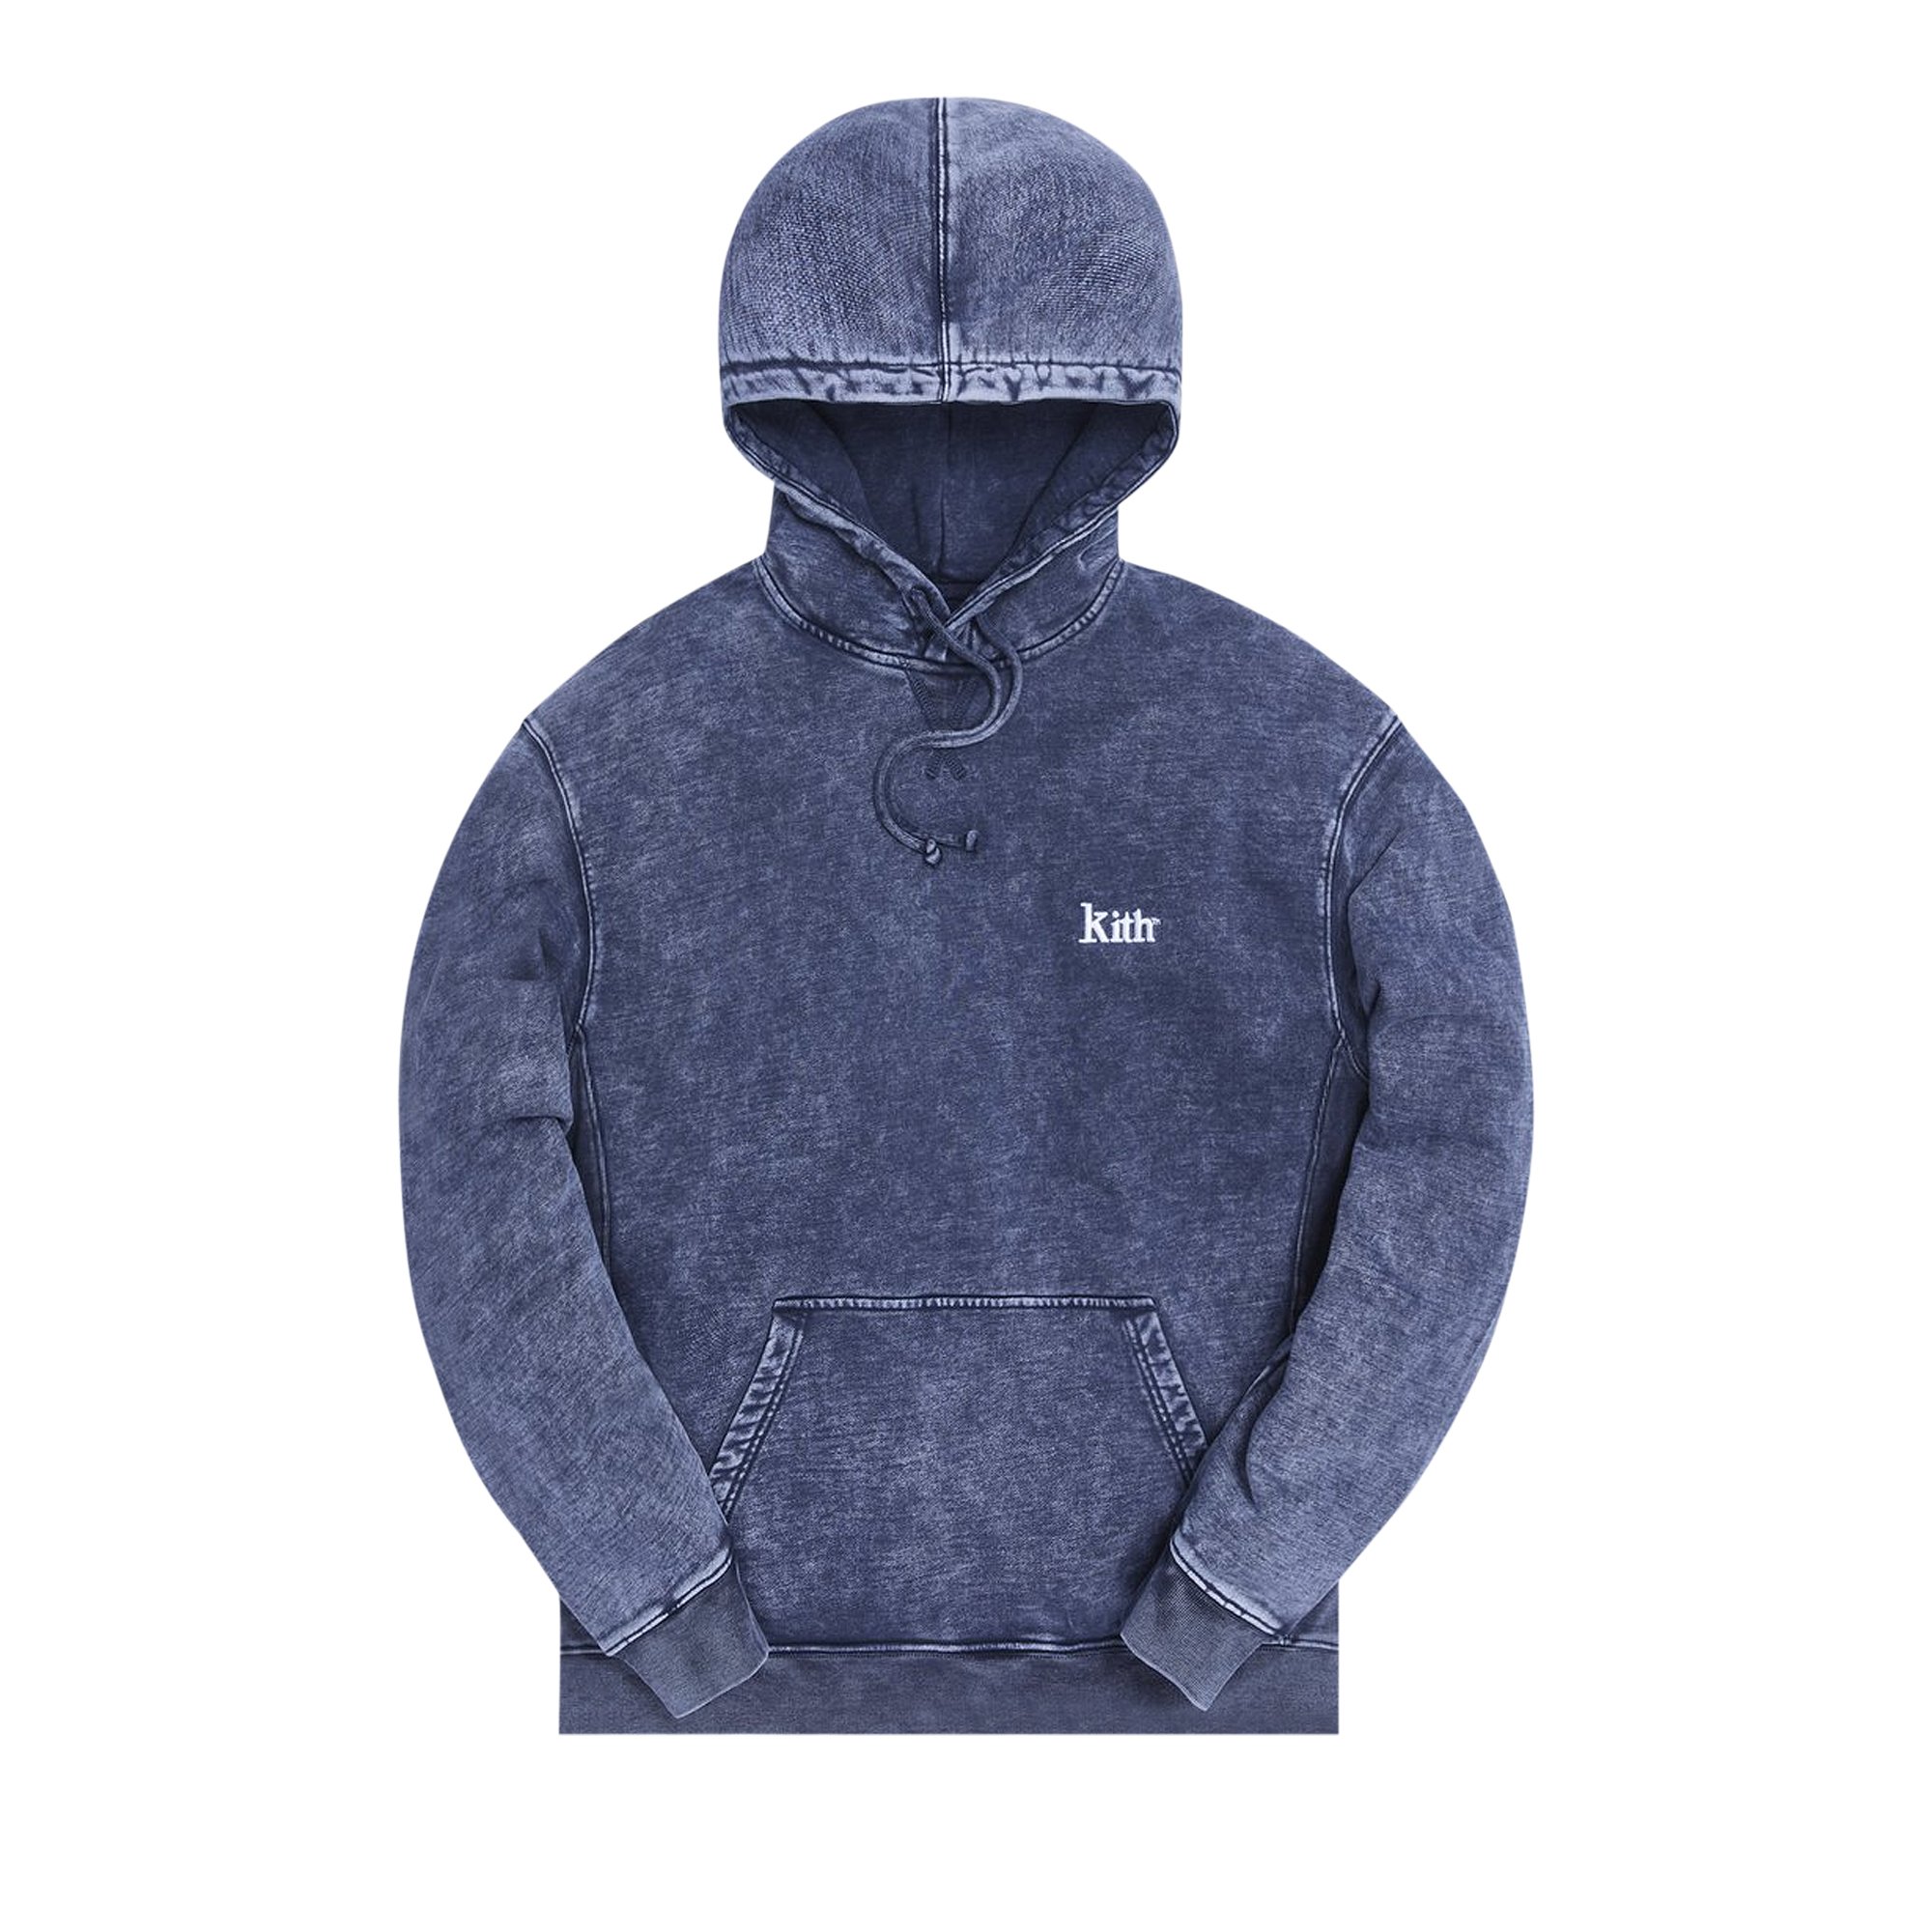 Buy Kith Williams III Hoodie 'Washed Navy' - KH2557 102 | GOAT